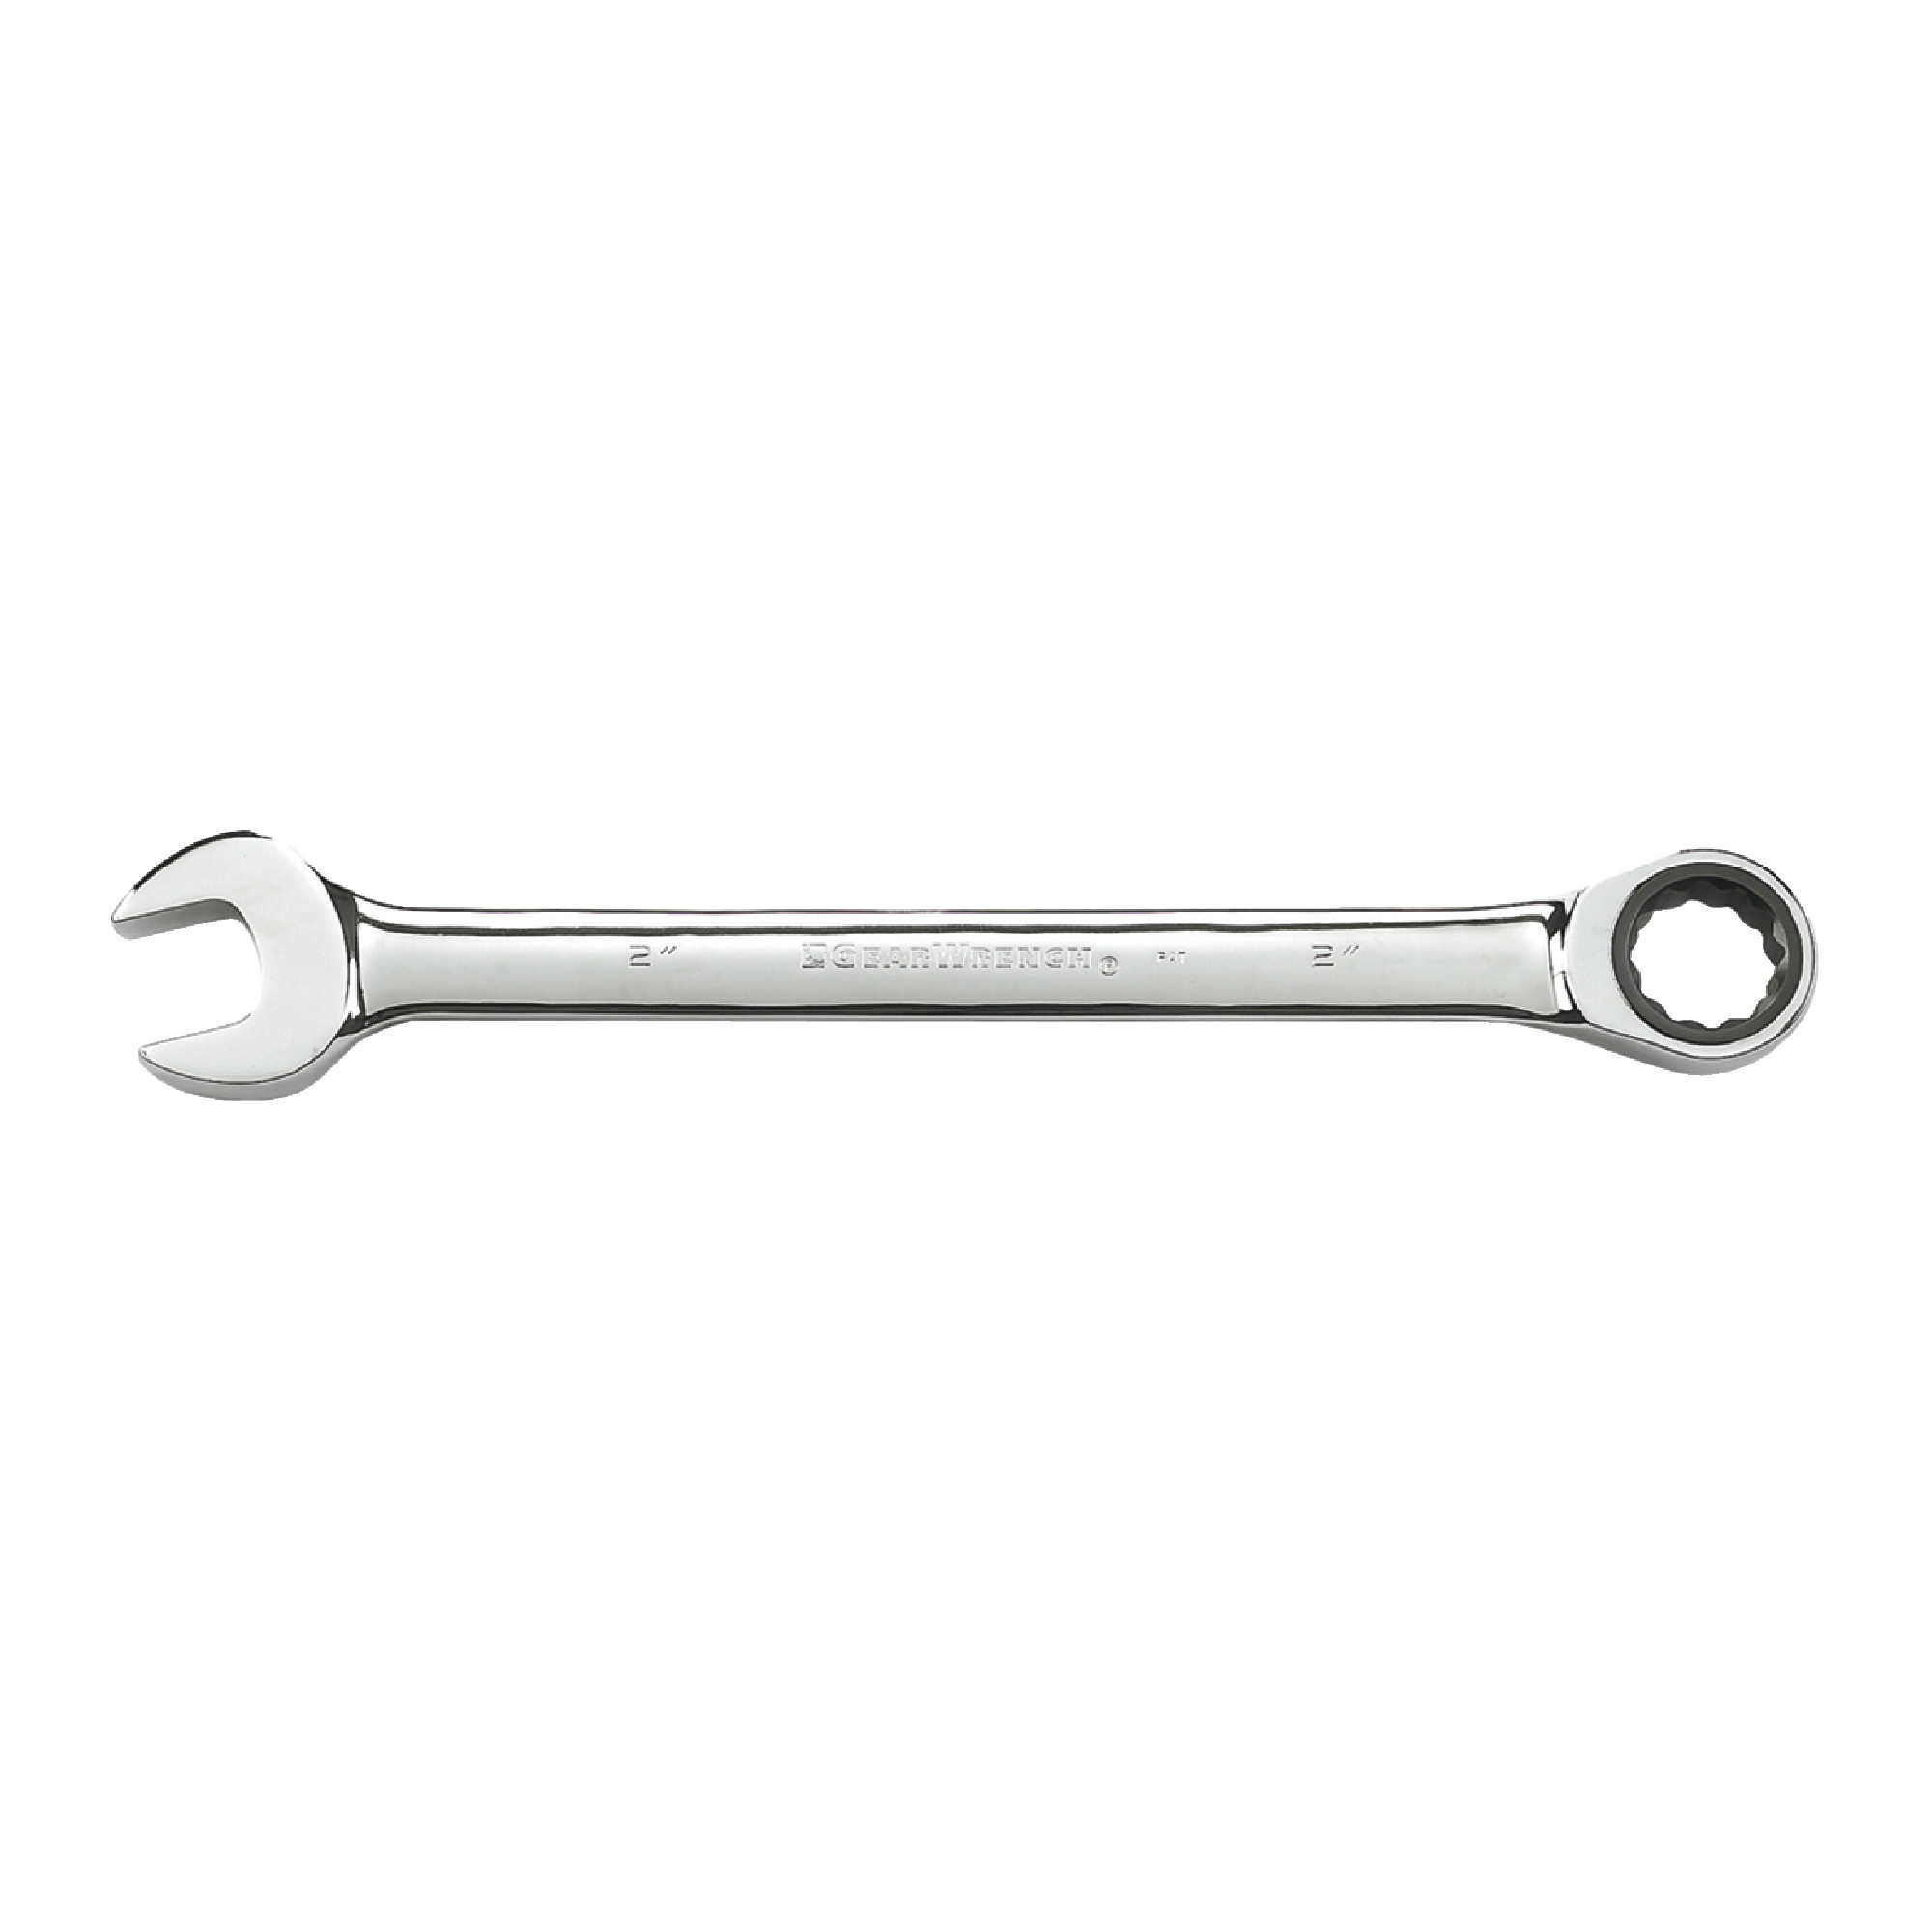 1-13/16" 12 Point Jumbo Ratcheting Combination Wrench